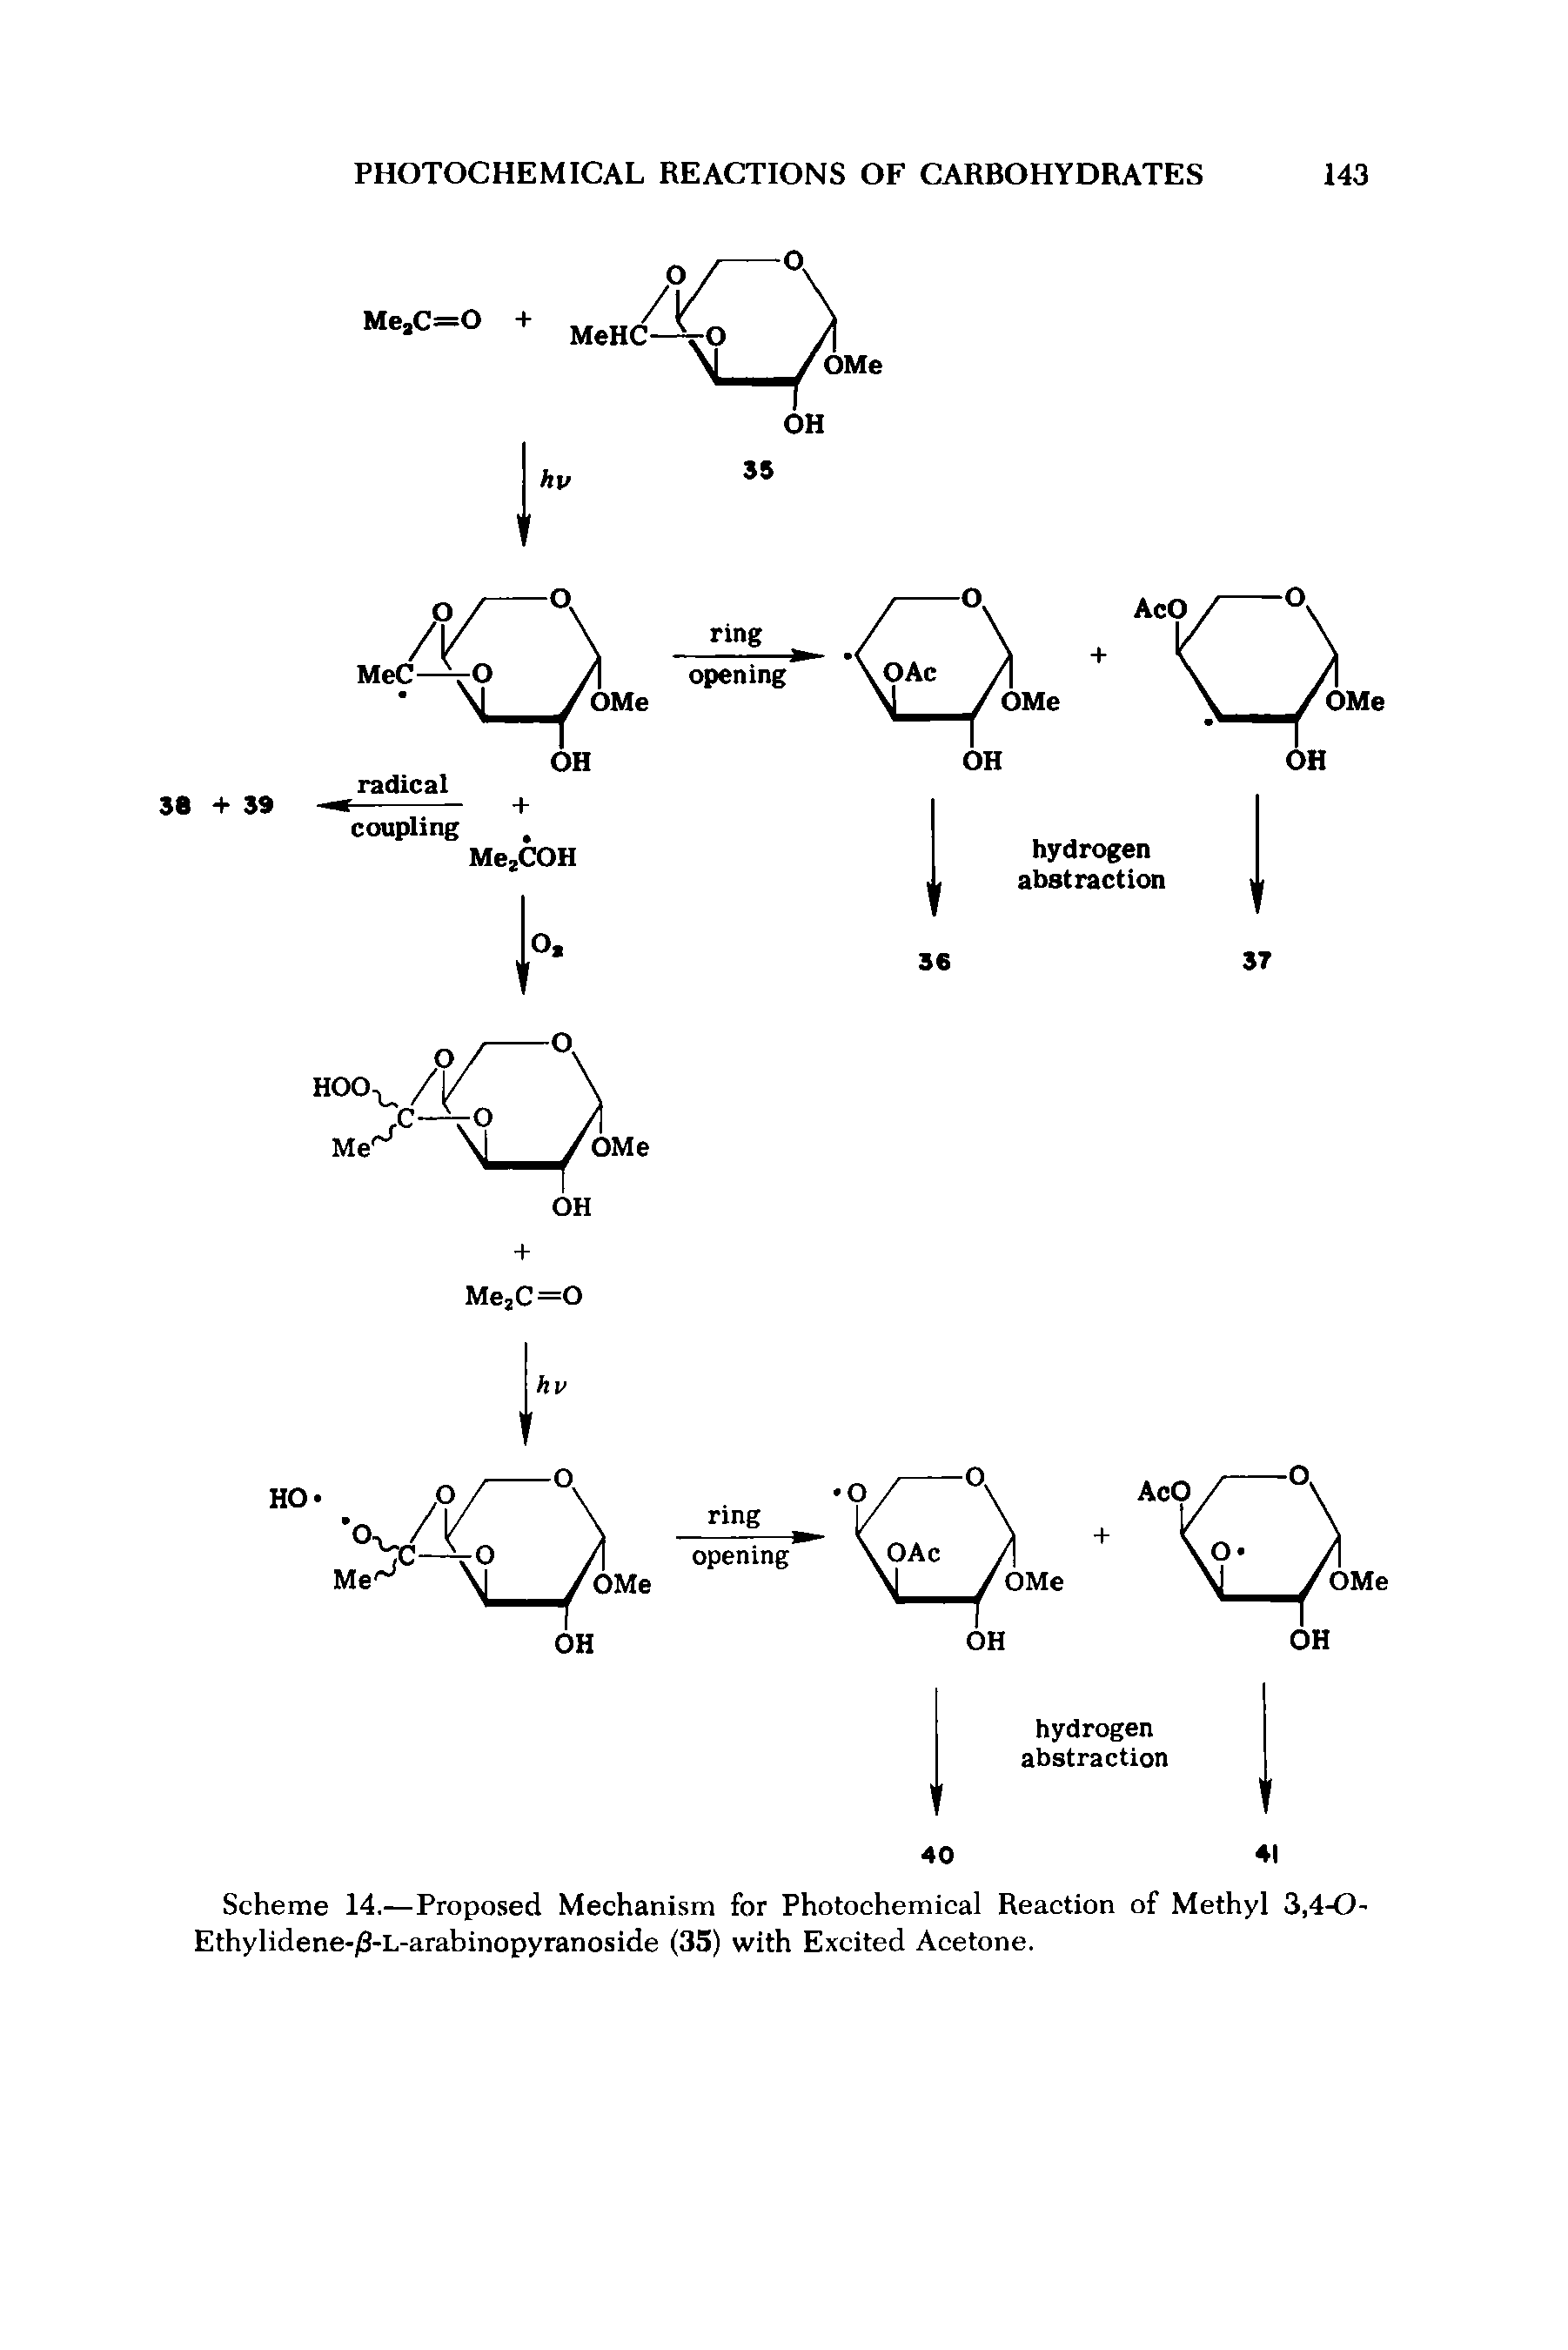 Scheme 14.—Proposed Mechanism for Photochemical Reaction of Methyl 3,4-0 Ethylidene-/3-L-arabinopyranoside (35) with Excited Acetone.